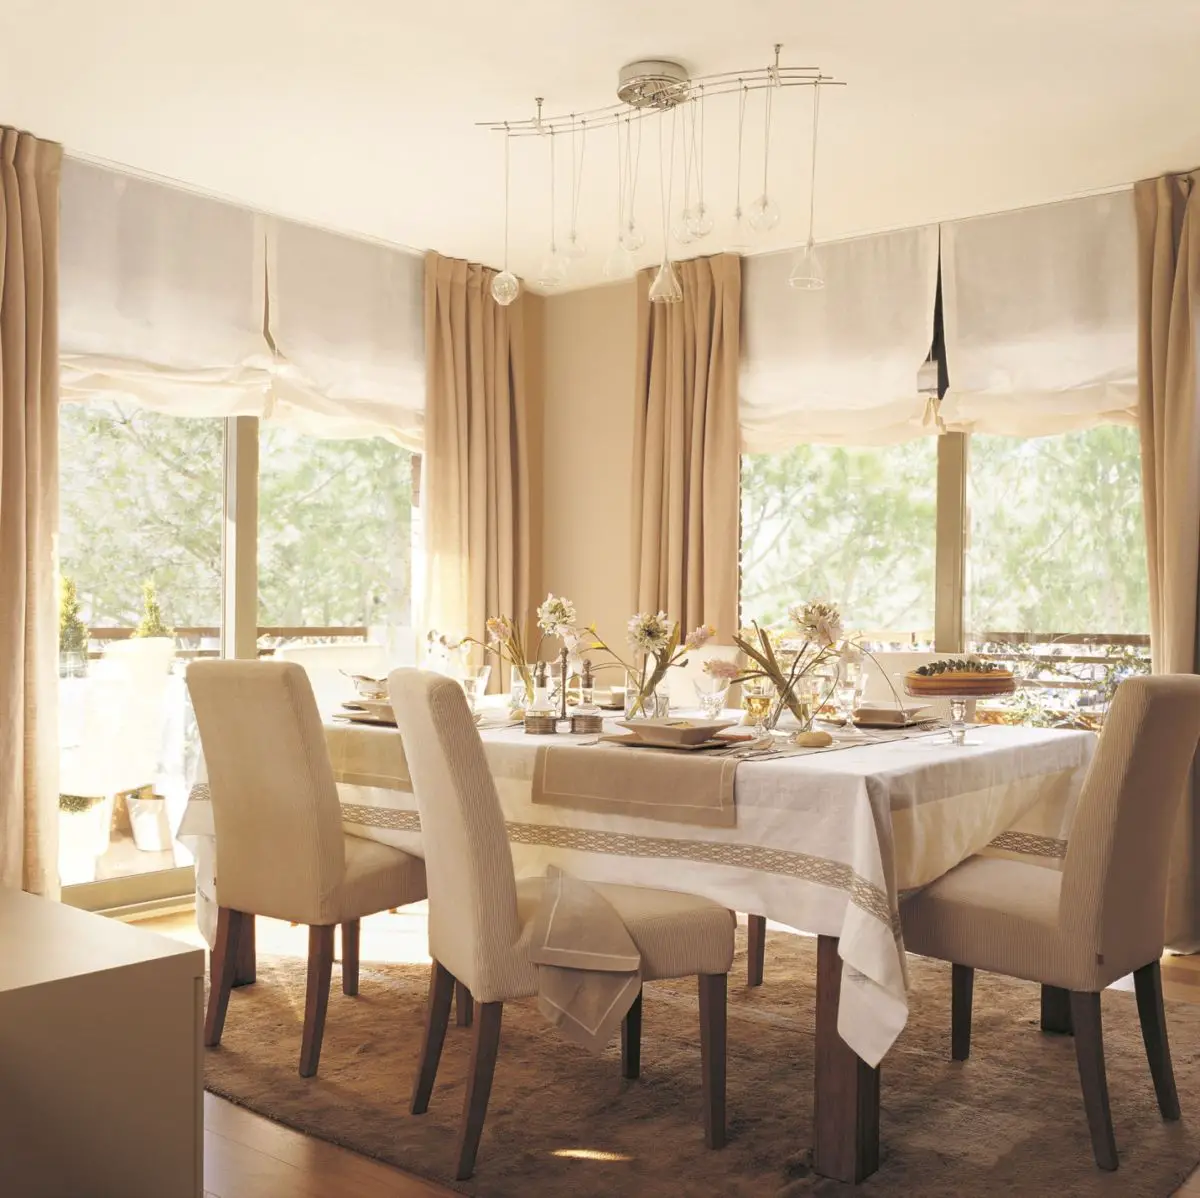 A dining room with beige curtains.